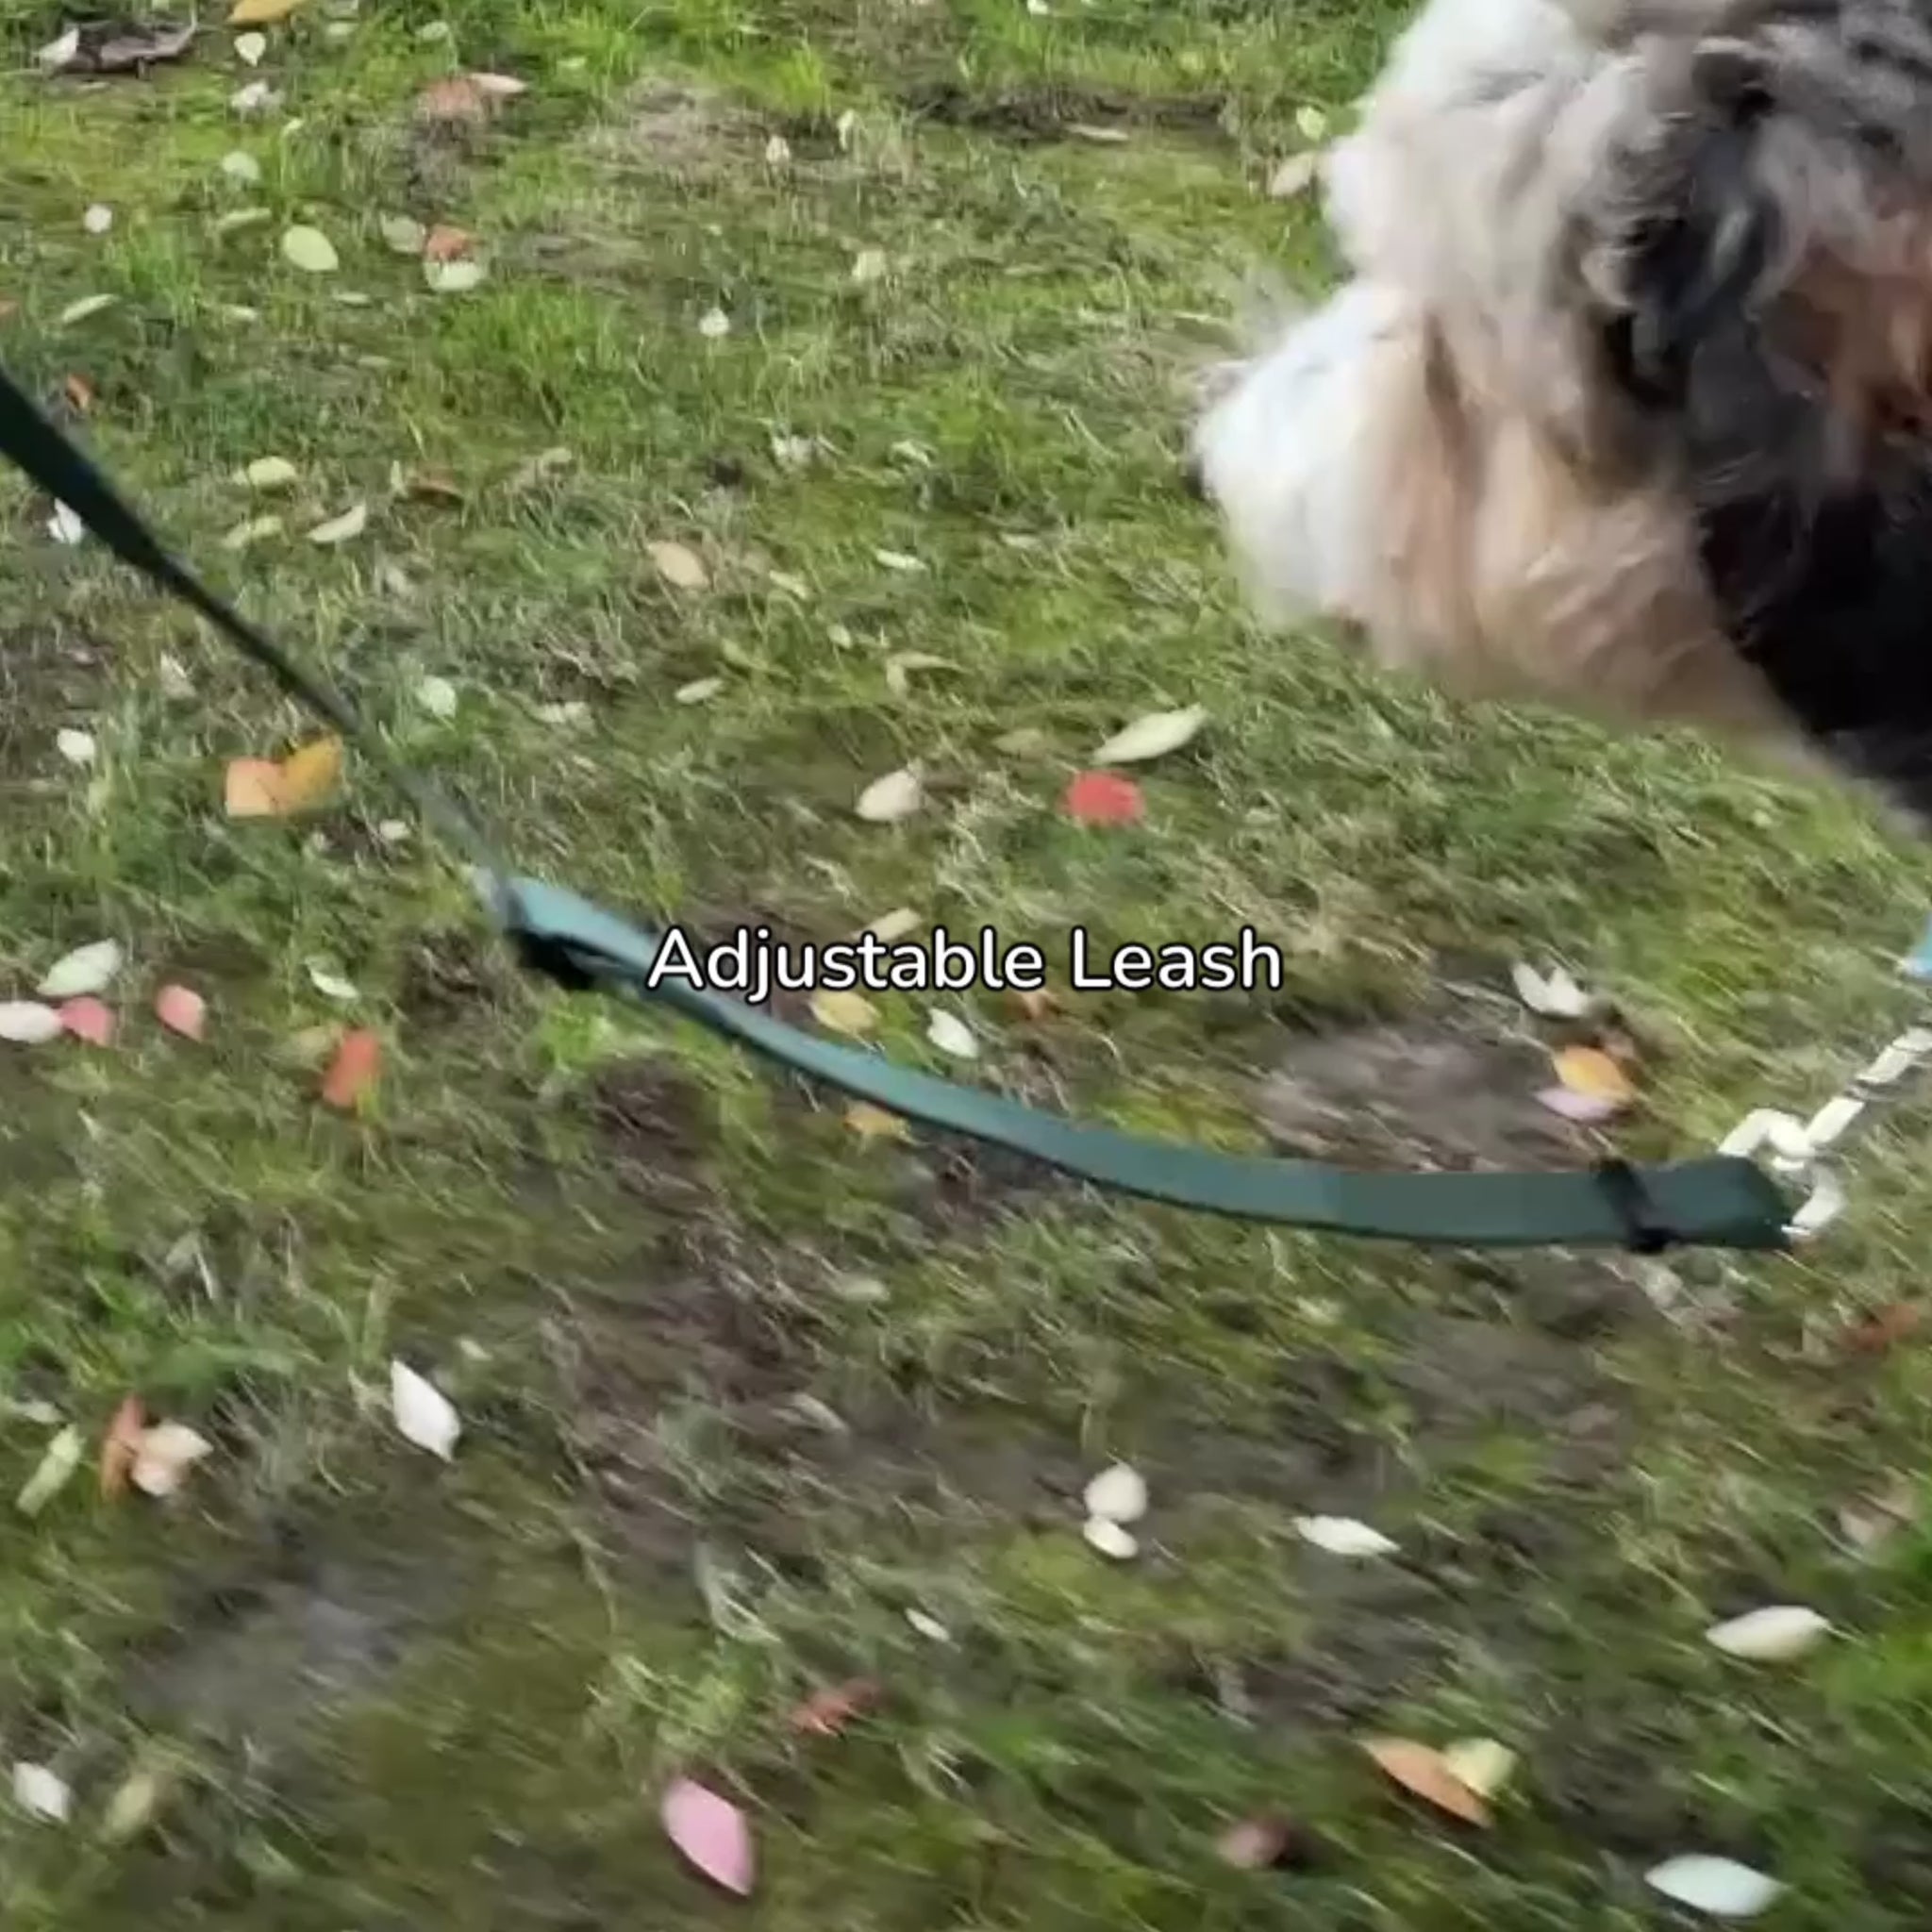 a video demonstrating an adjustable leash from fearless pet it shows it adjusting from 3 to 6 feet and the padded handle